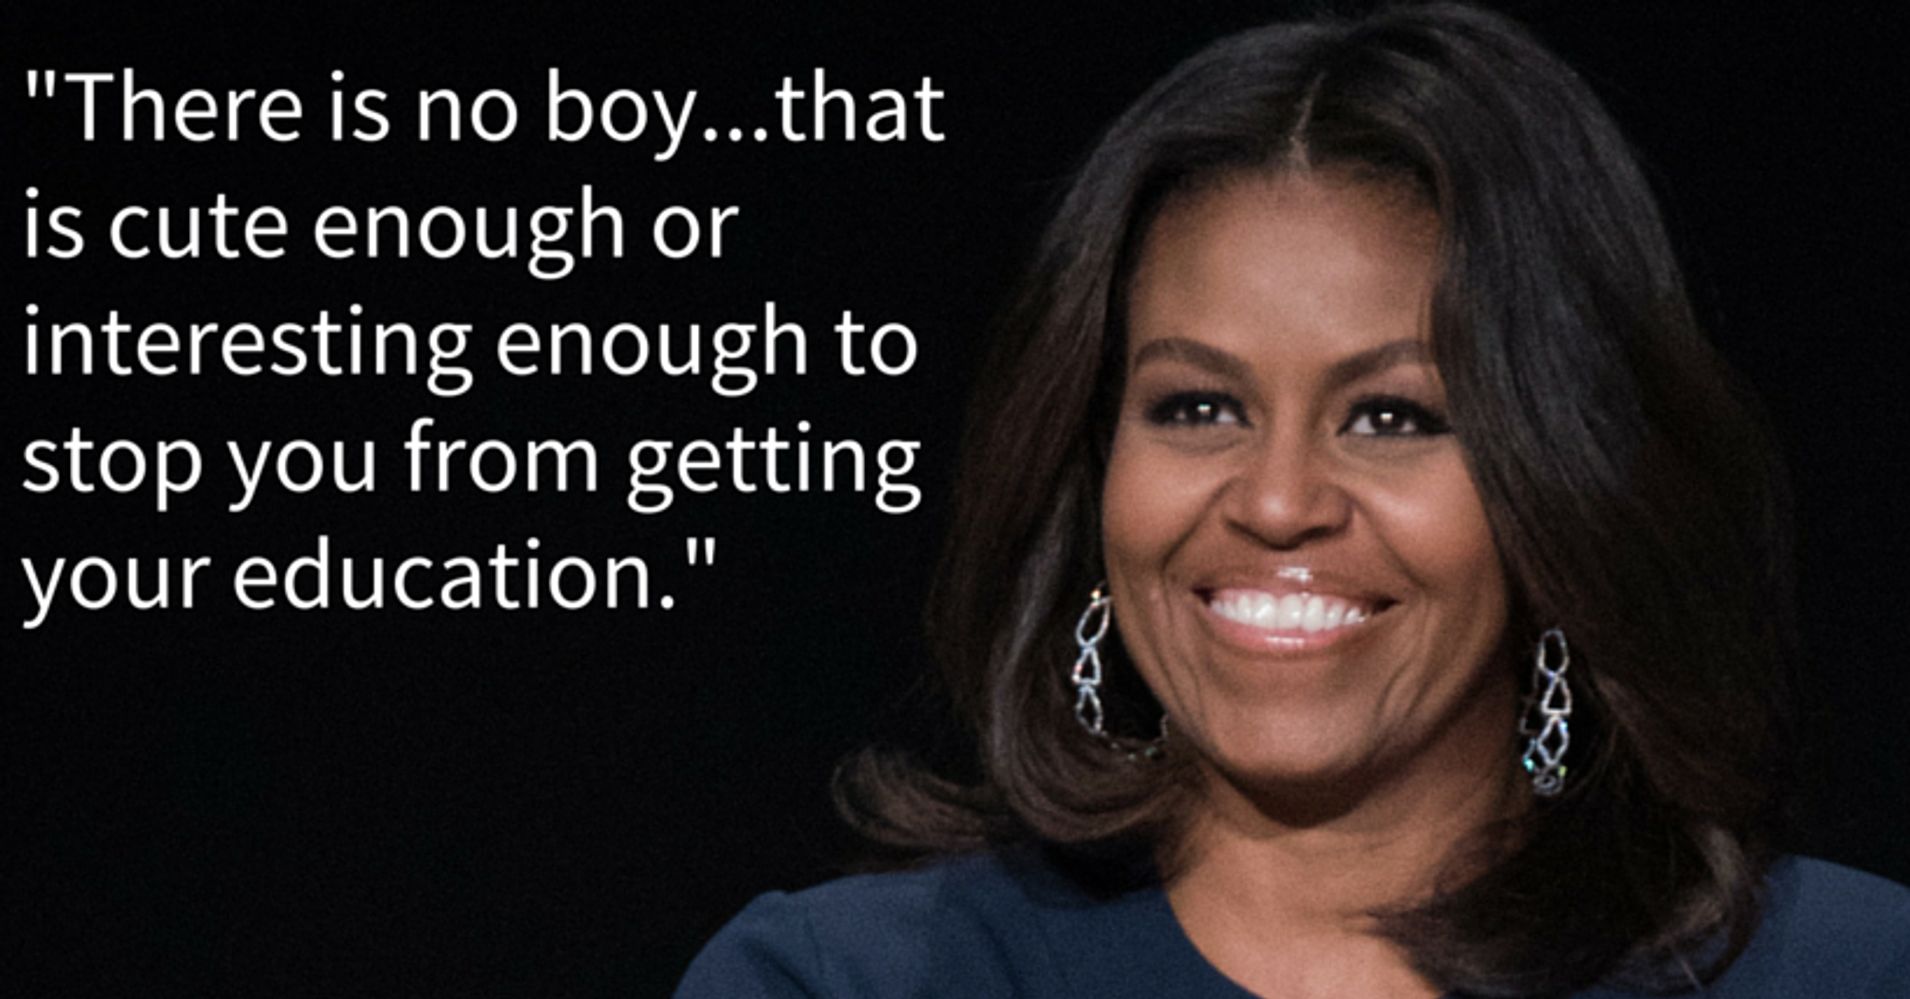 Michelle Obama Dropped Some Wisdom Every Young Girl Should Hear | HuffPost1910 x 999